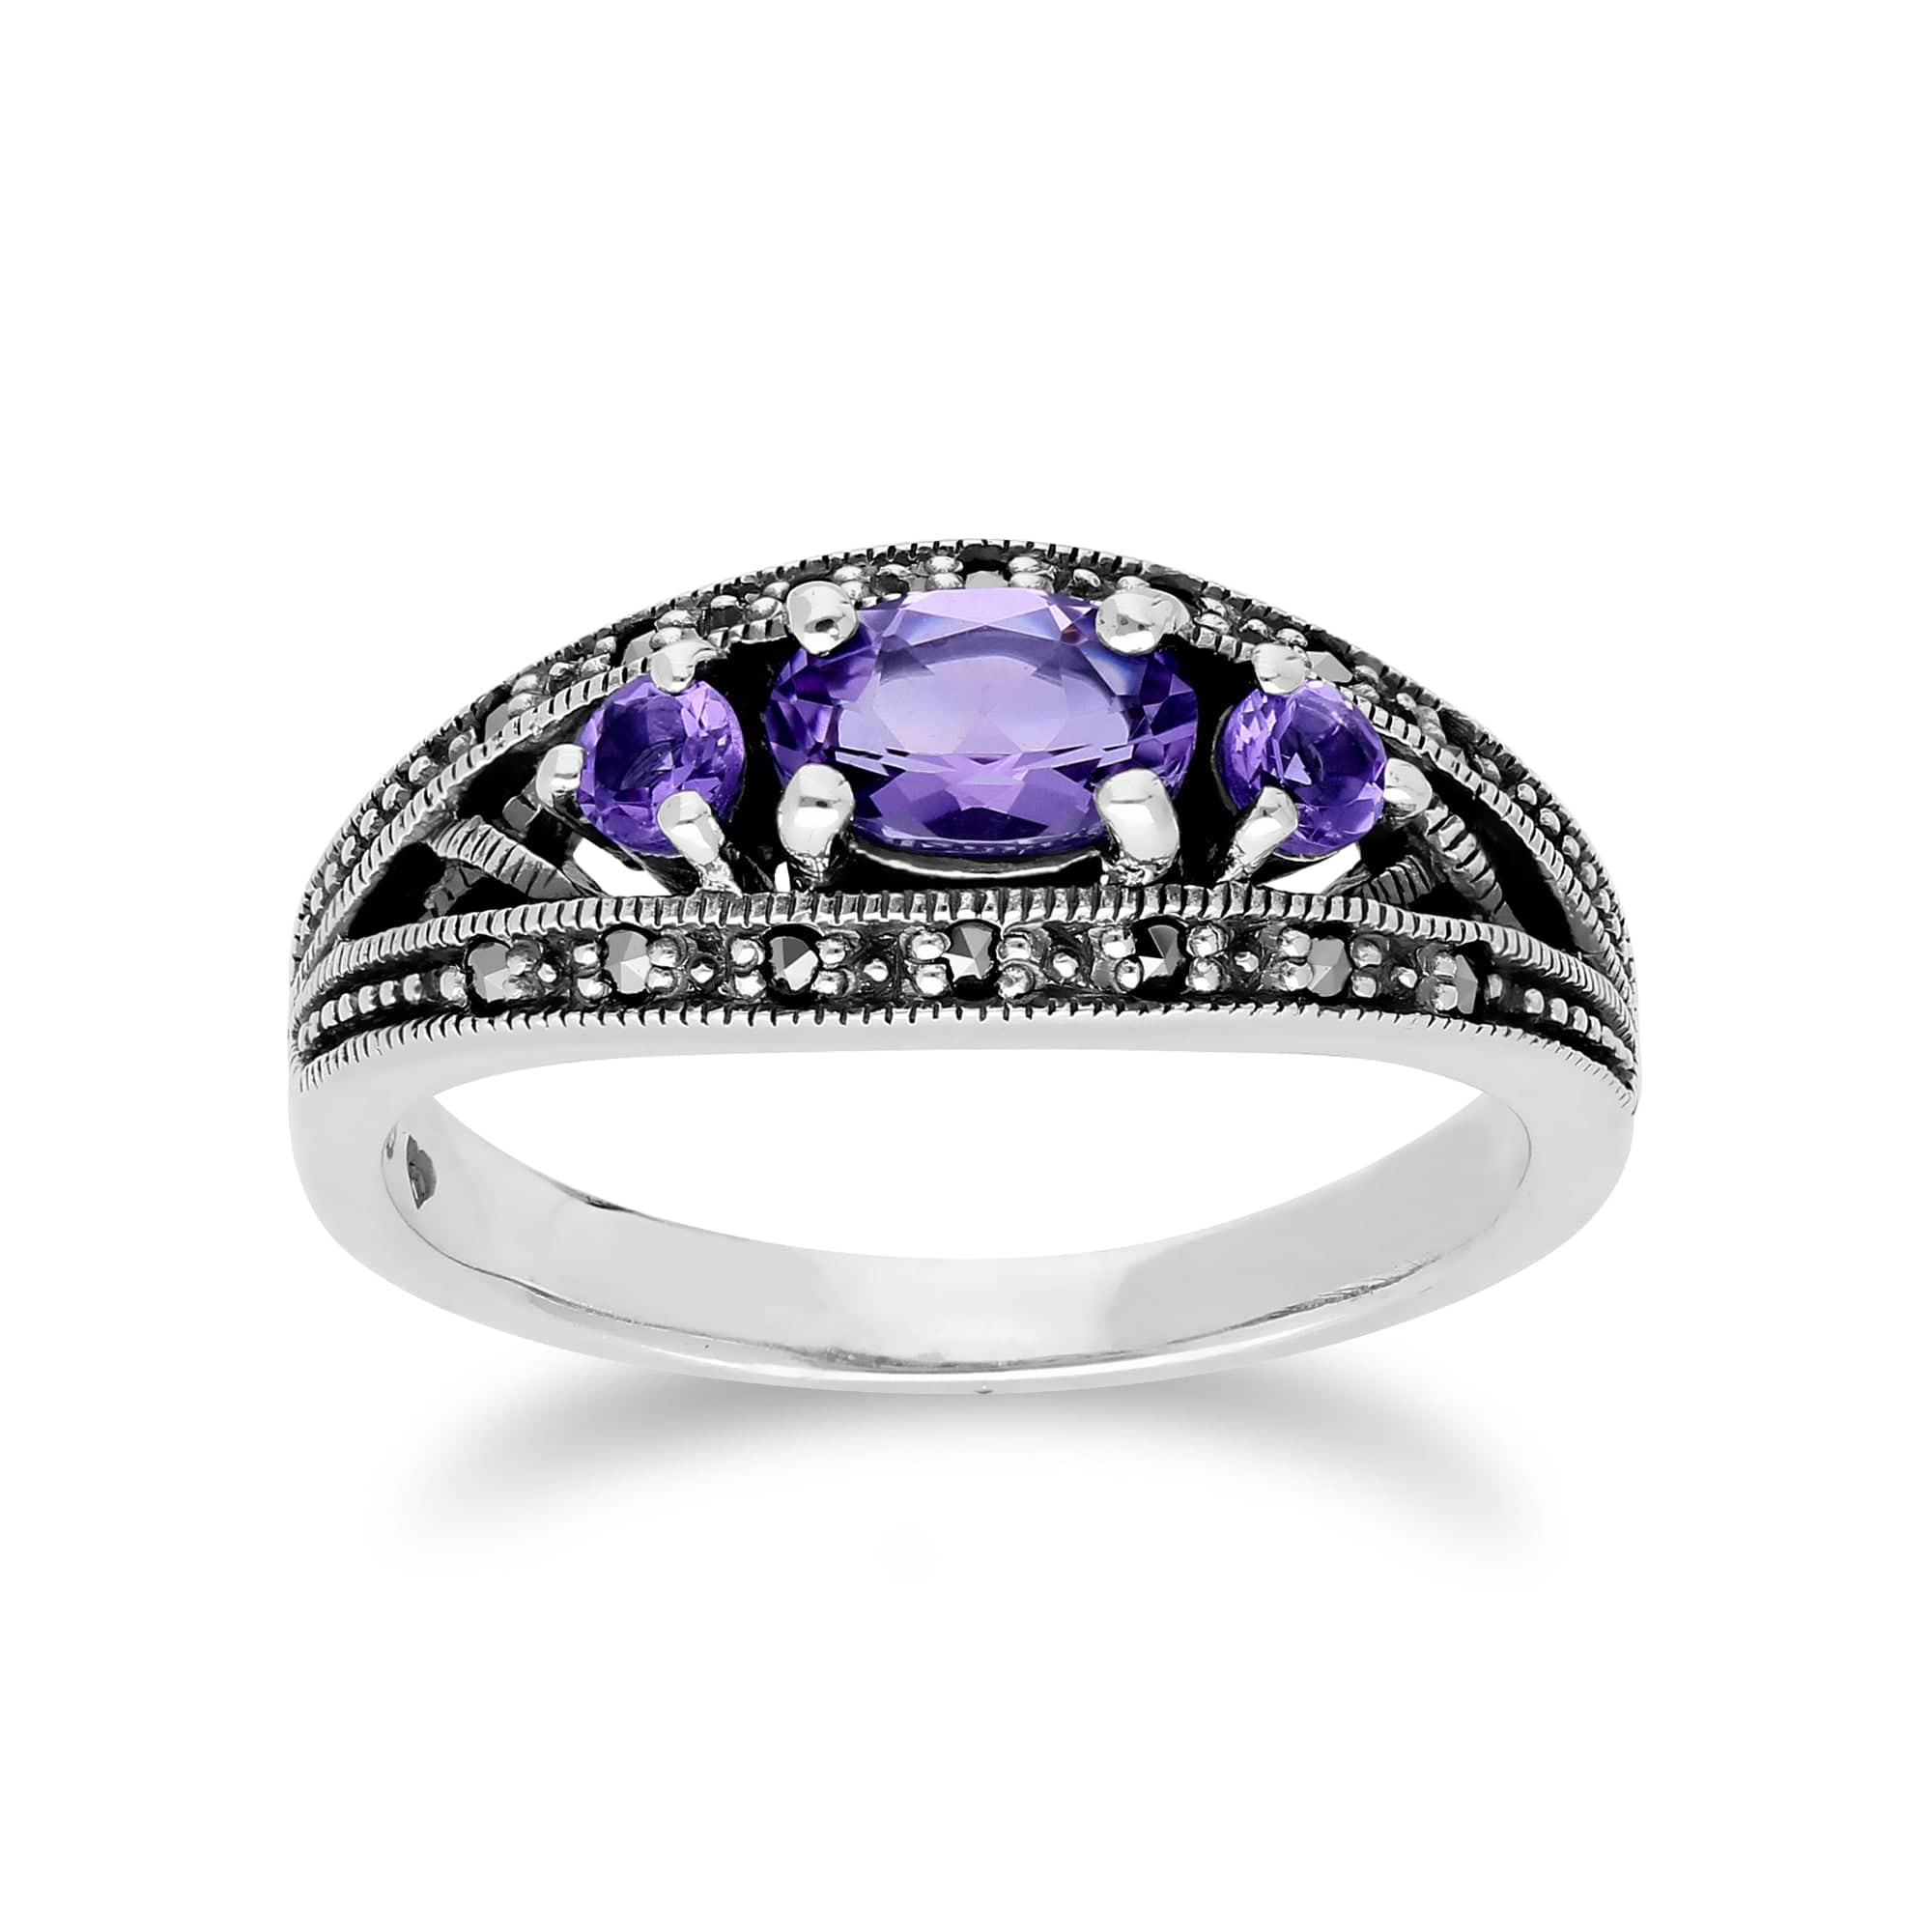 214R424001925 Art Deco Style Oval Amethyst & Marcasite Three Stone Ring in 925 Sterling Silver 1